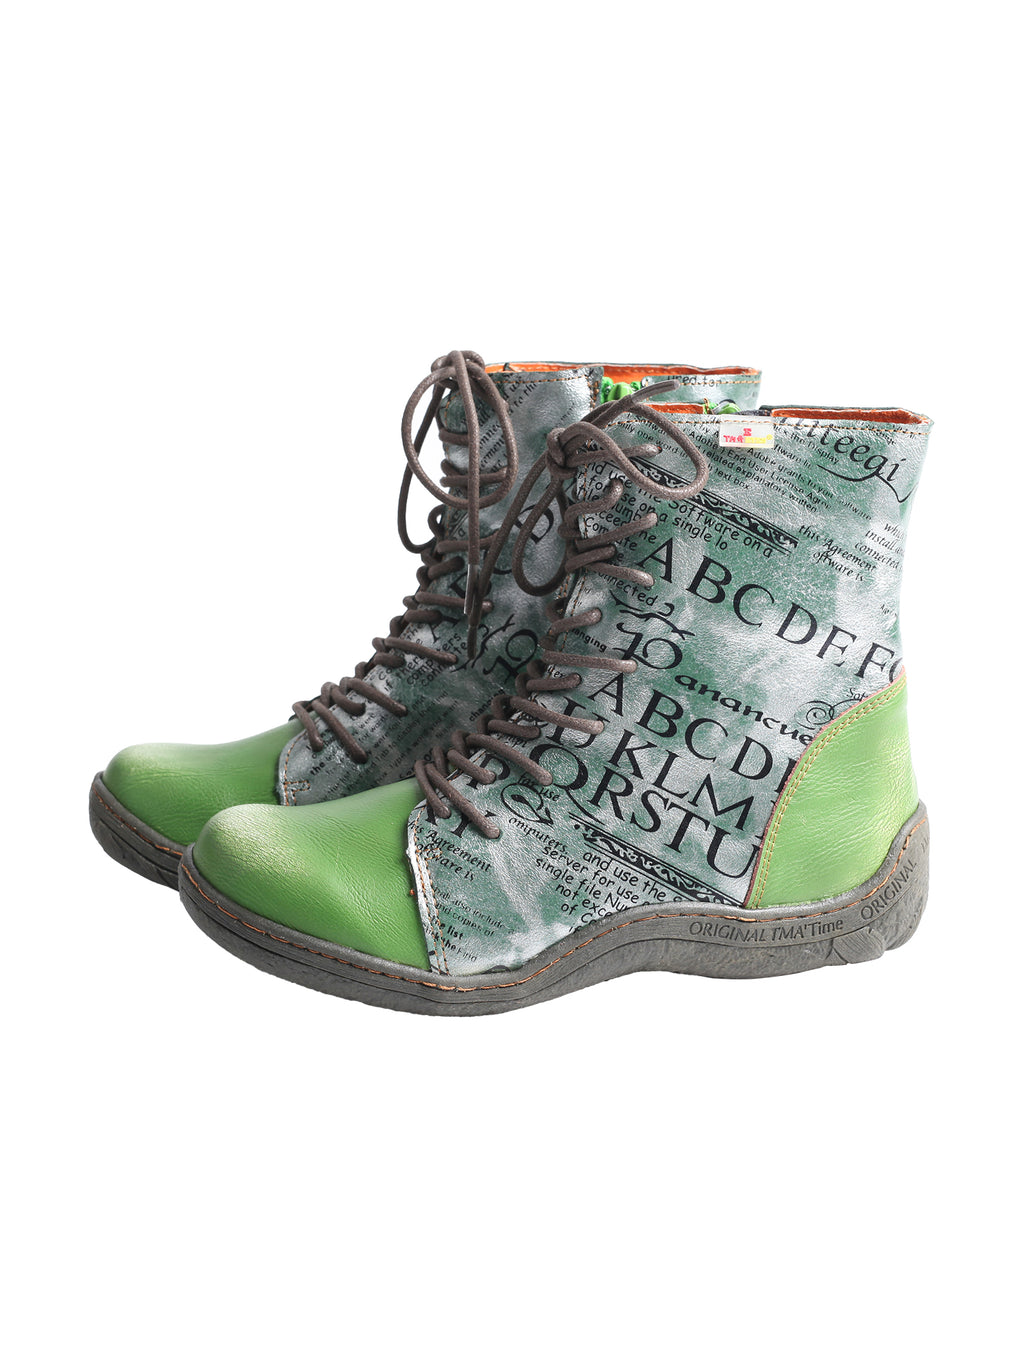 TMA EYES Women's Leather Ankle Boots Lace-Up Patchwork Letter Printing Leather Boots for Women